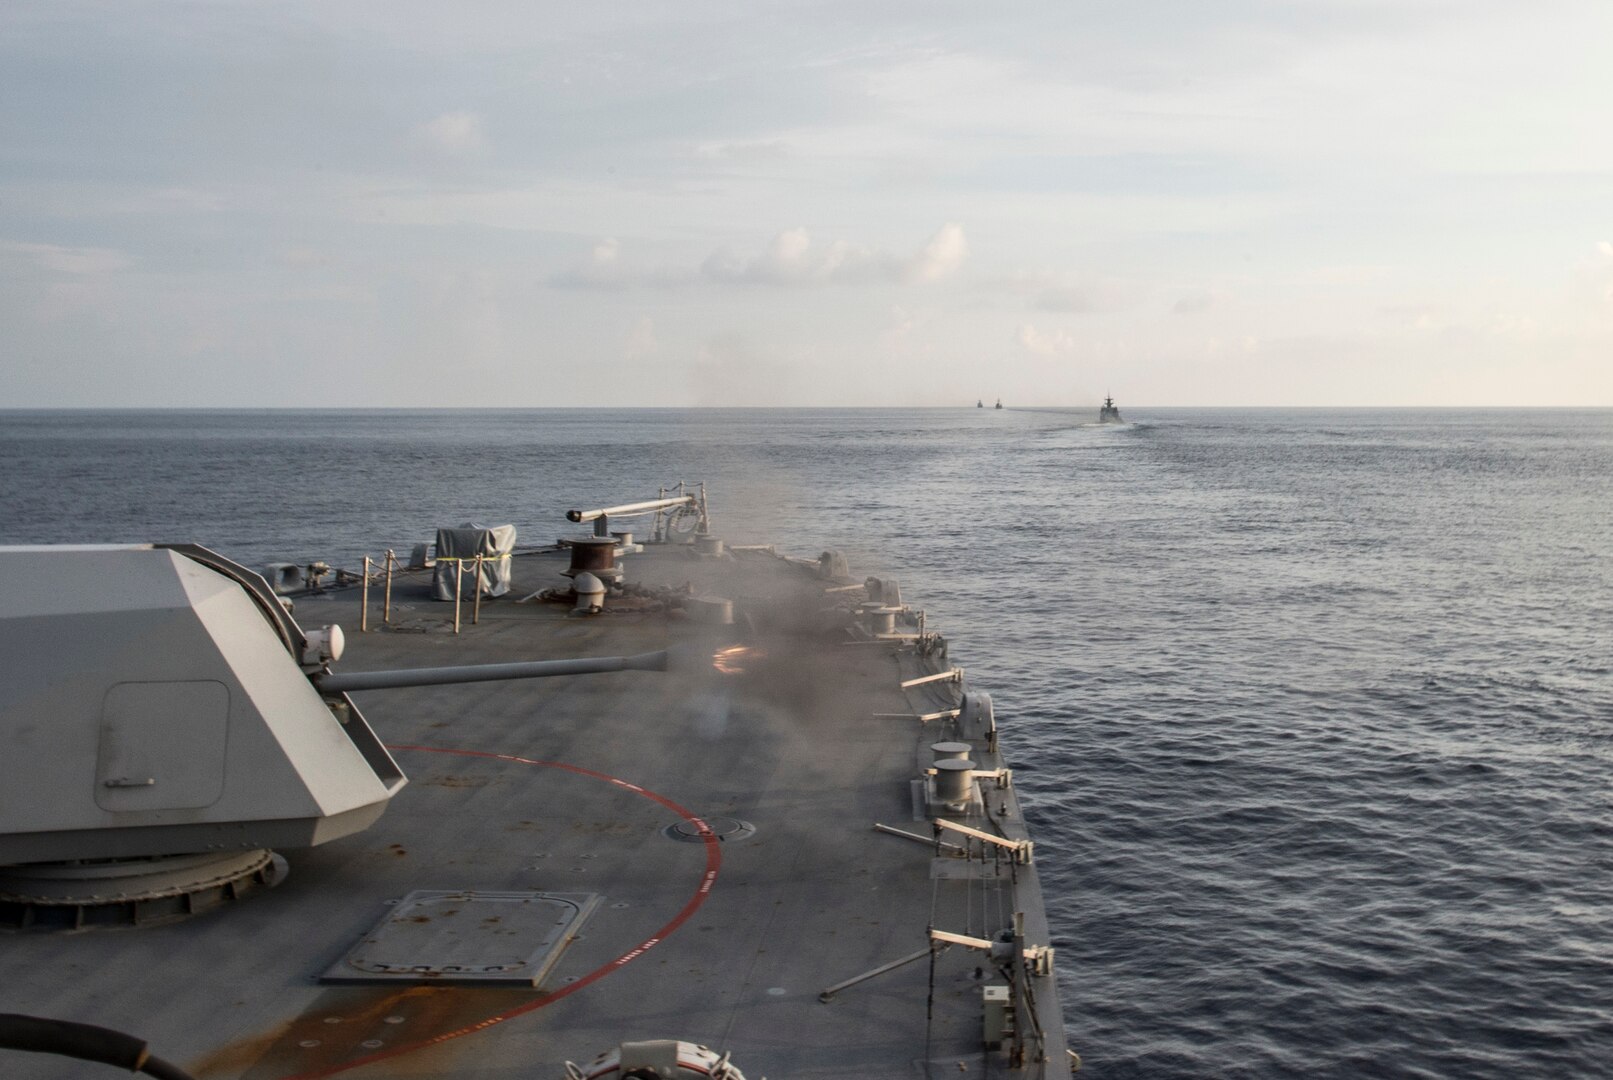 151001-N-MK881-887
BAY OF BENGAL (October 1, 2015) The littoral combat ship USS Fort Worth (LCS 3) fires at a target during a gun exercise with the Bangladesh Navy during Cooperation Afloat Readiness and Training (CARAT) Bangladesh 2015. CARAT is an annual, bilateral exercise series with the U.S. Navy, U.S. Marine Corps and the armed forces of nine partner nations. (U.S. Navy photo by Mass Communication Specialist 2nd Class Joe Bishop/Released)